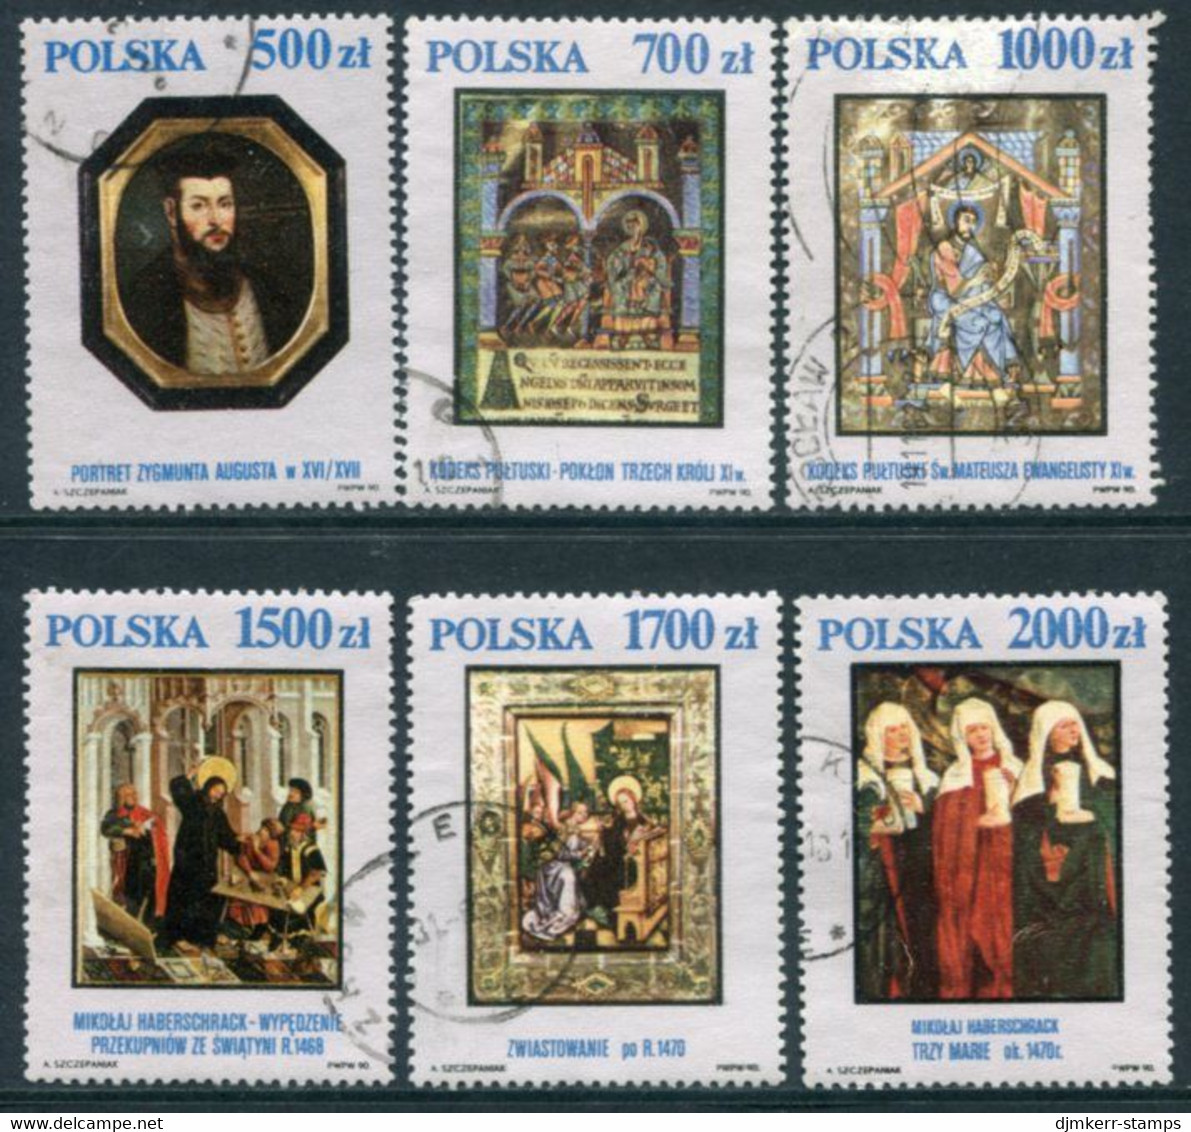 POLAND 1991 Paintings From National Museum Used.  Michel 3306-11 - Usados